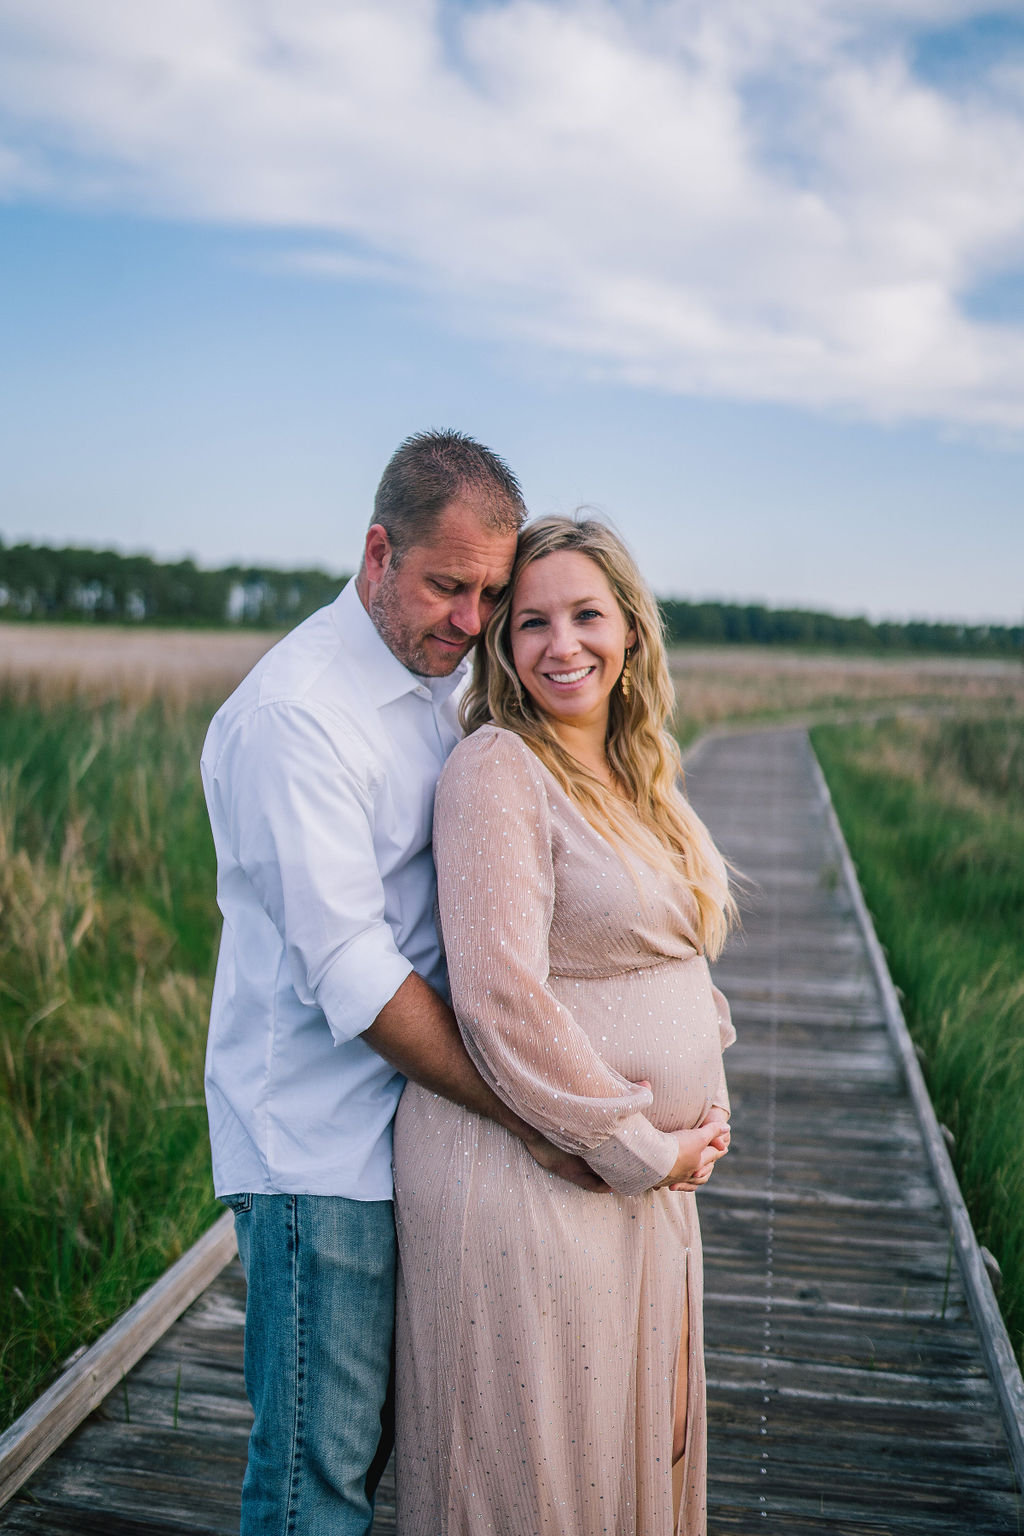 man and woman standing on a dock together, man is holding the woman's pregnant stomach and looking down at her as she smiles at the camera